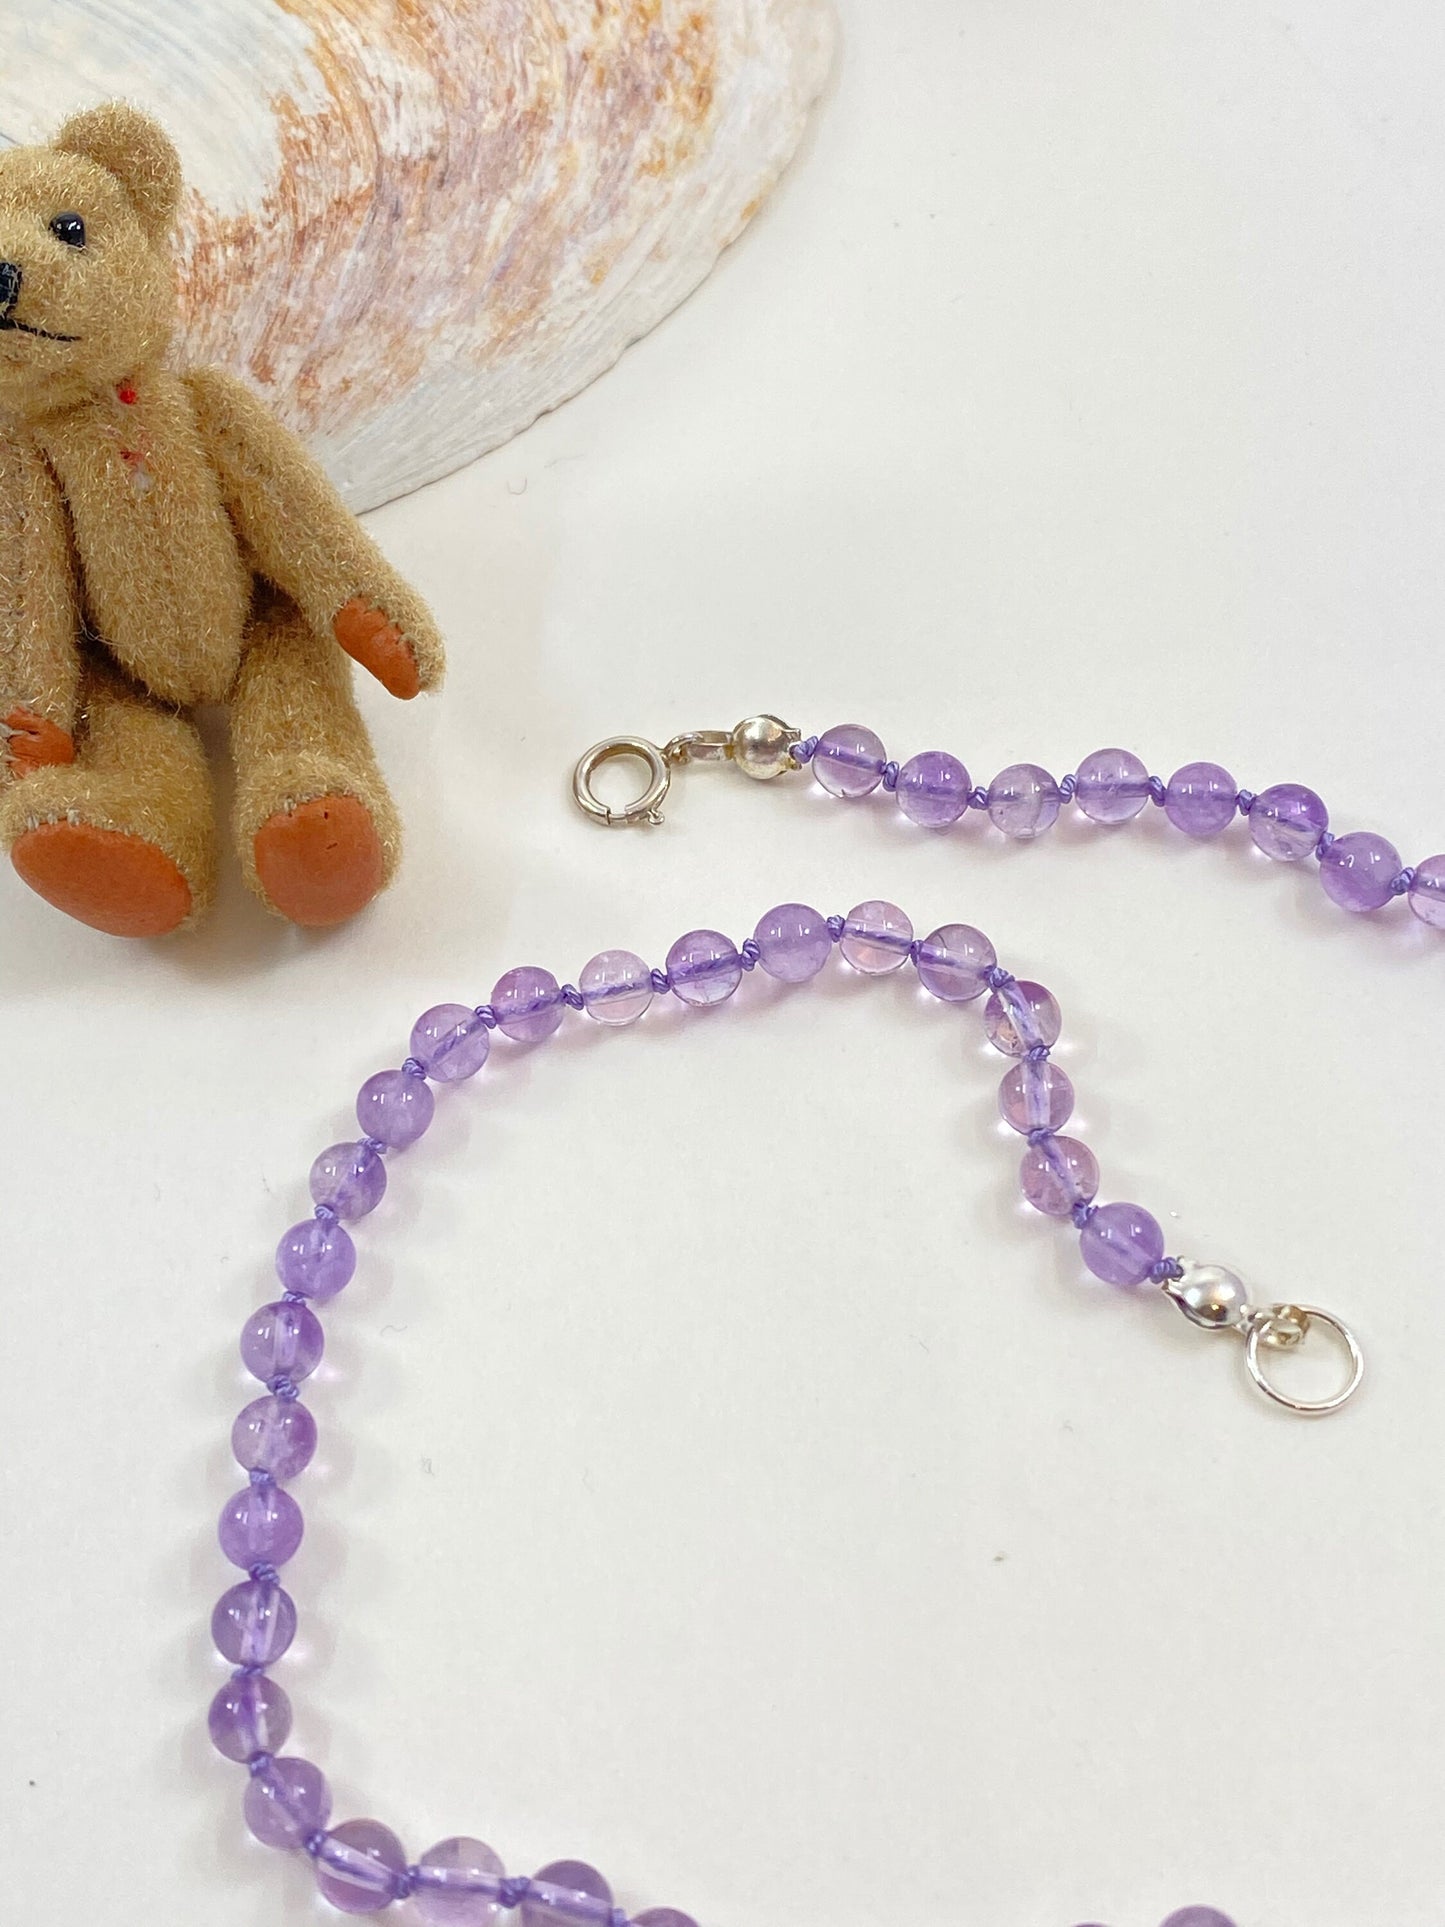 Soft amethyst knotted necklace for babies and toddlers. This necklace is 11" long, including the sterling silver clasp.